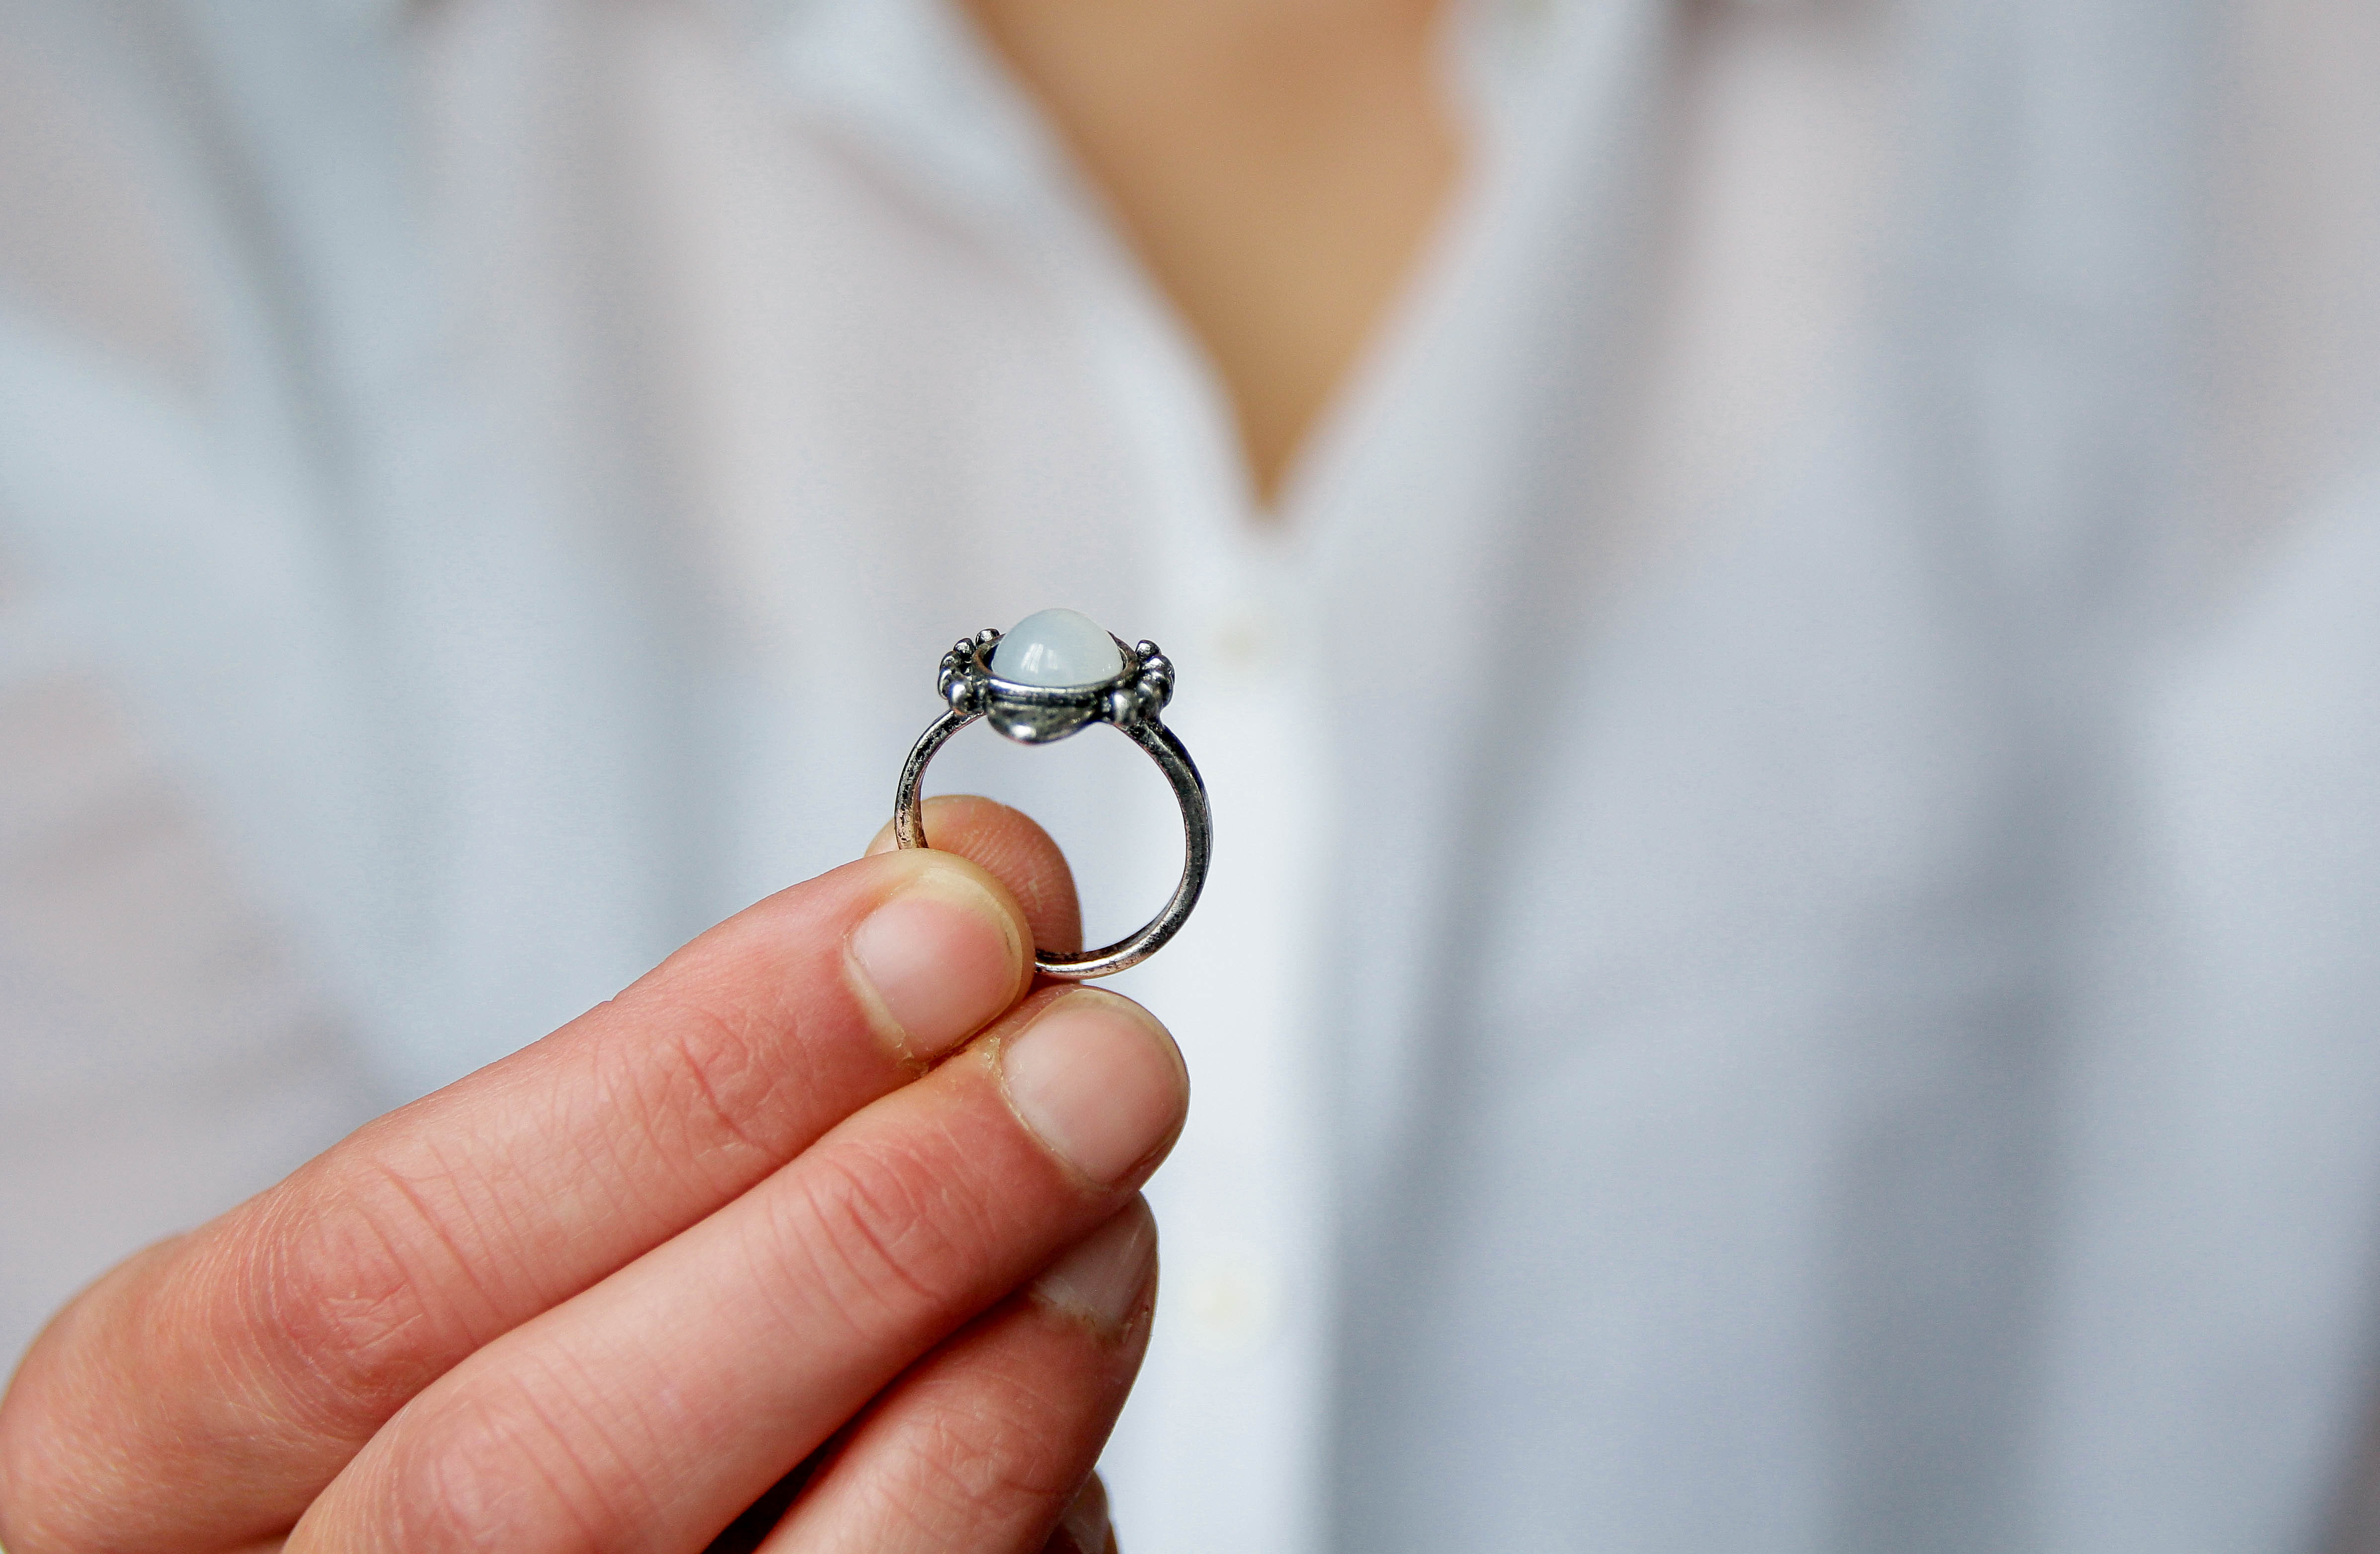 A woman taking a ring | Source: Getty Images